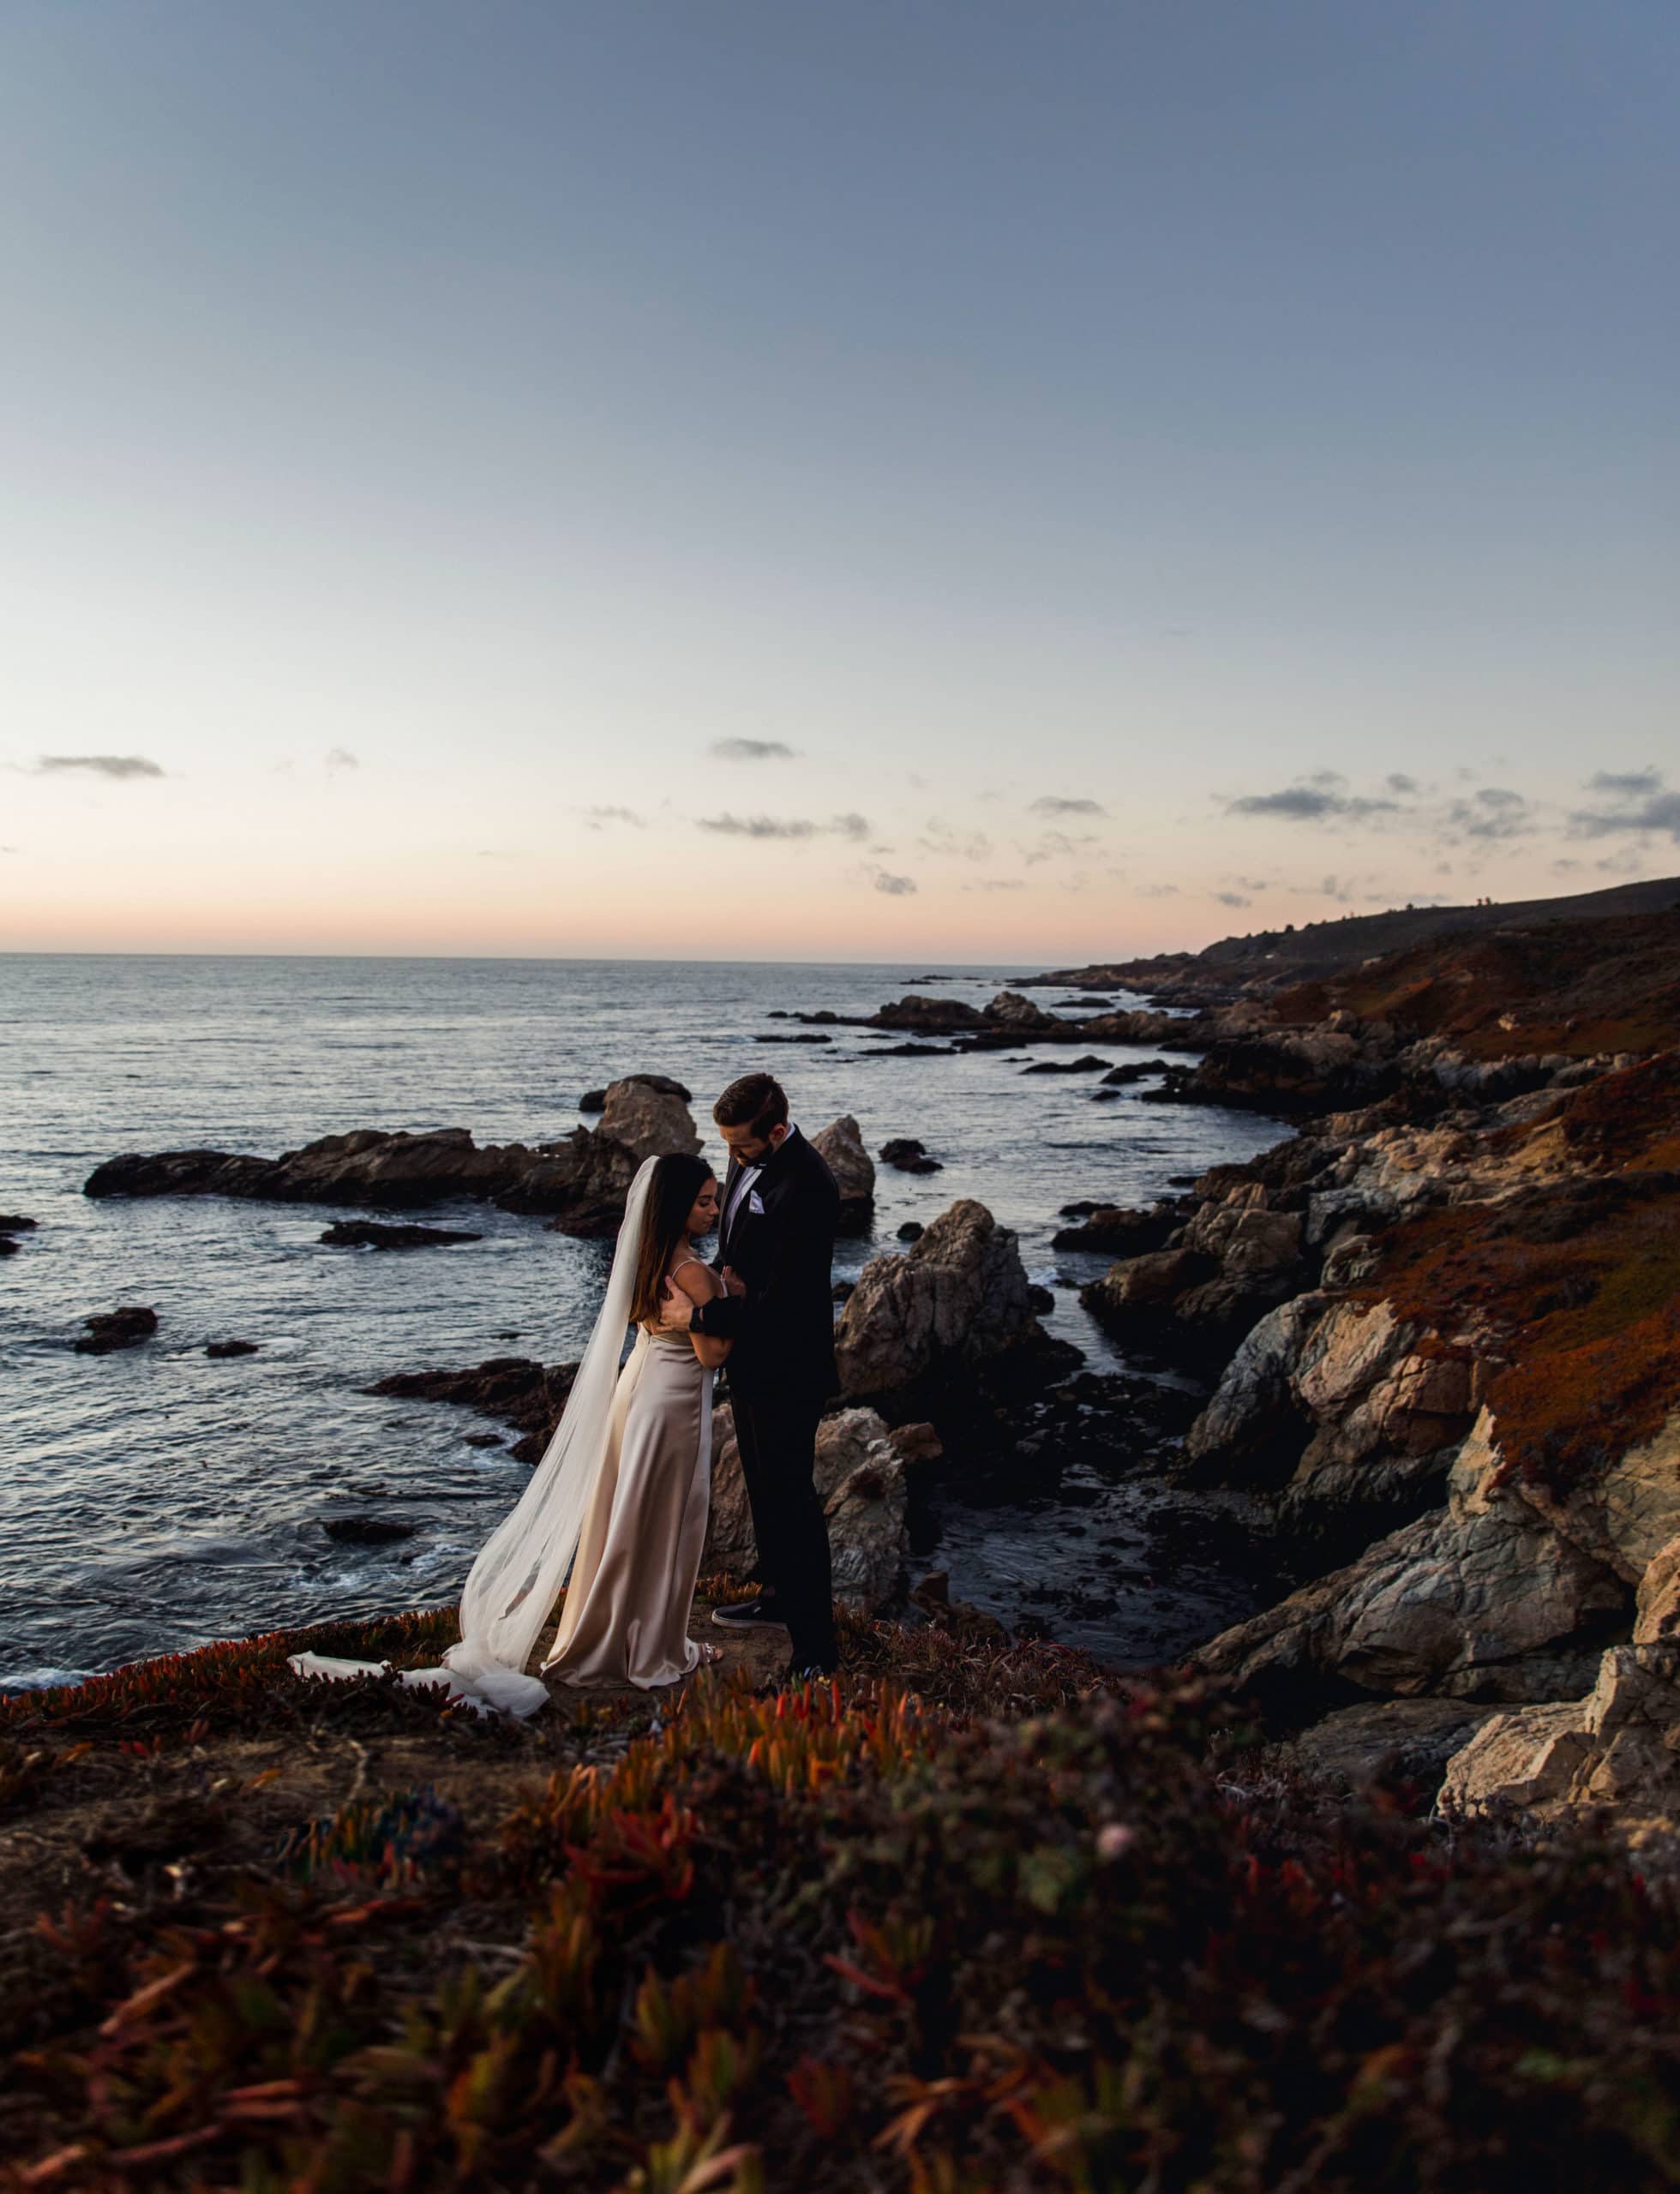 A wedding in Big Sur National Park also known as a California elopement.